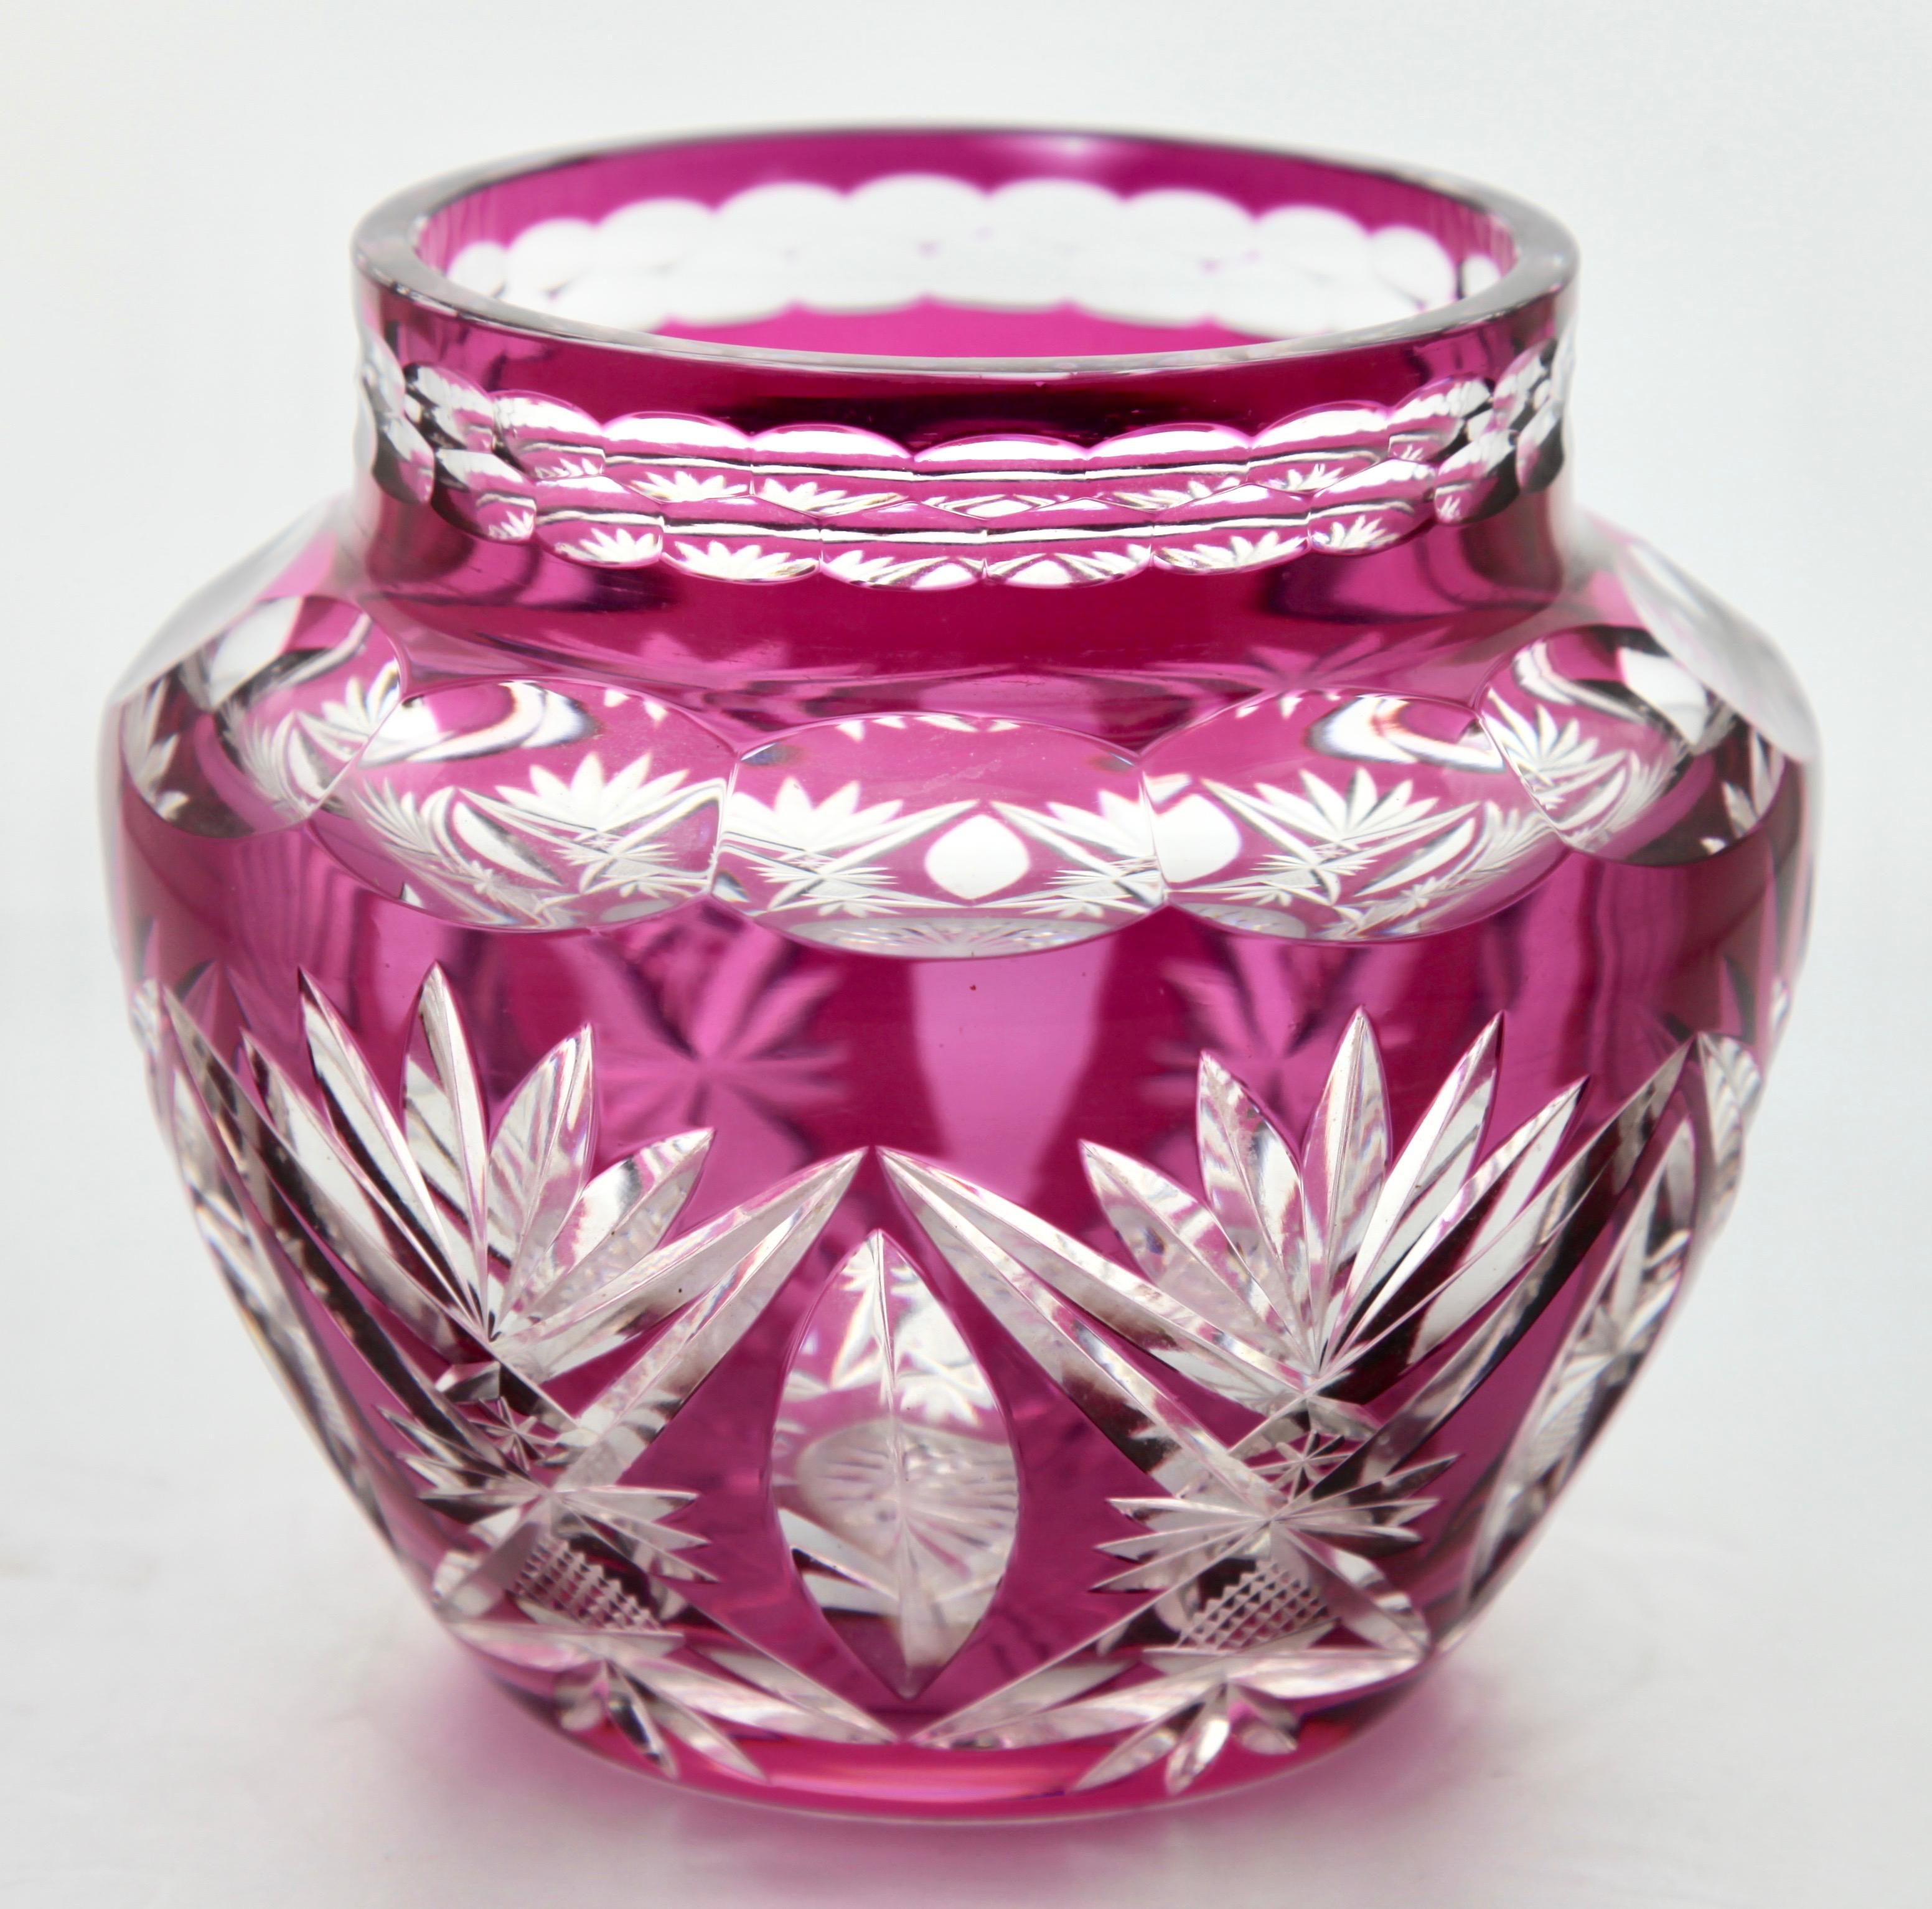 Faceted Val Saint Lambert Crystal 'Pique Fleurs' Vase in Amethyst with Grille, 1930s